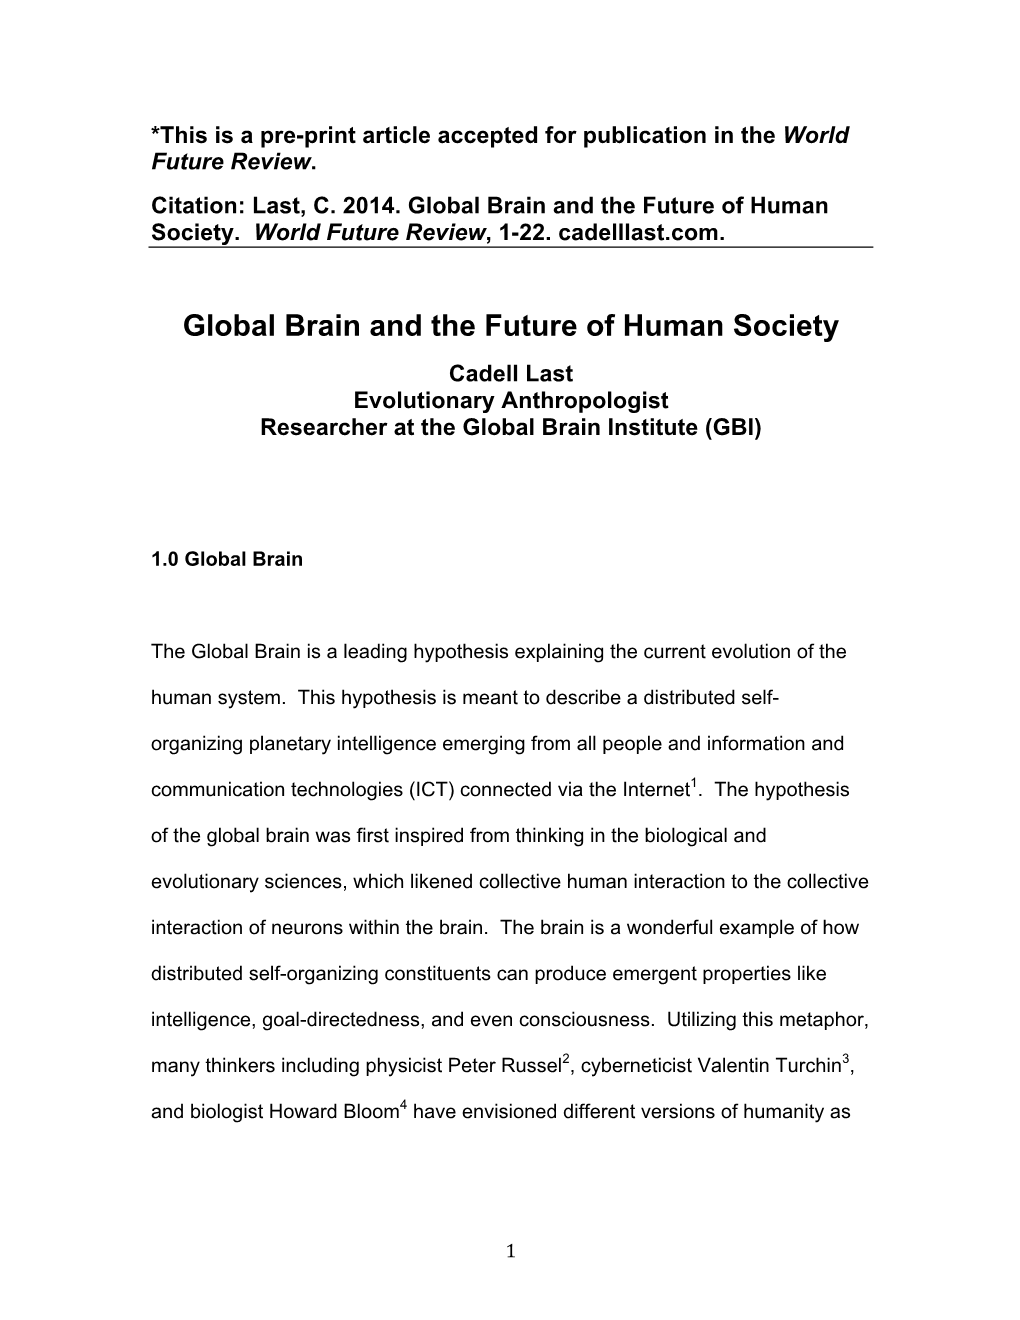 Global Brain and the Future of Human Society